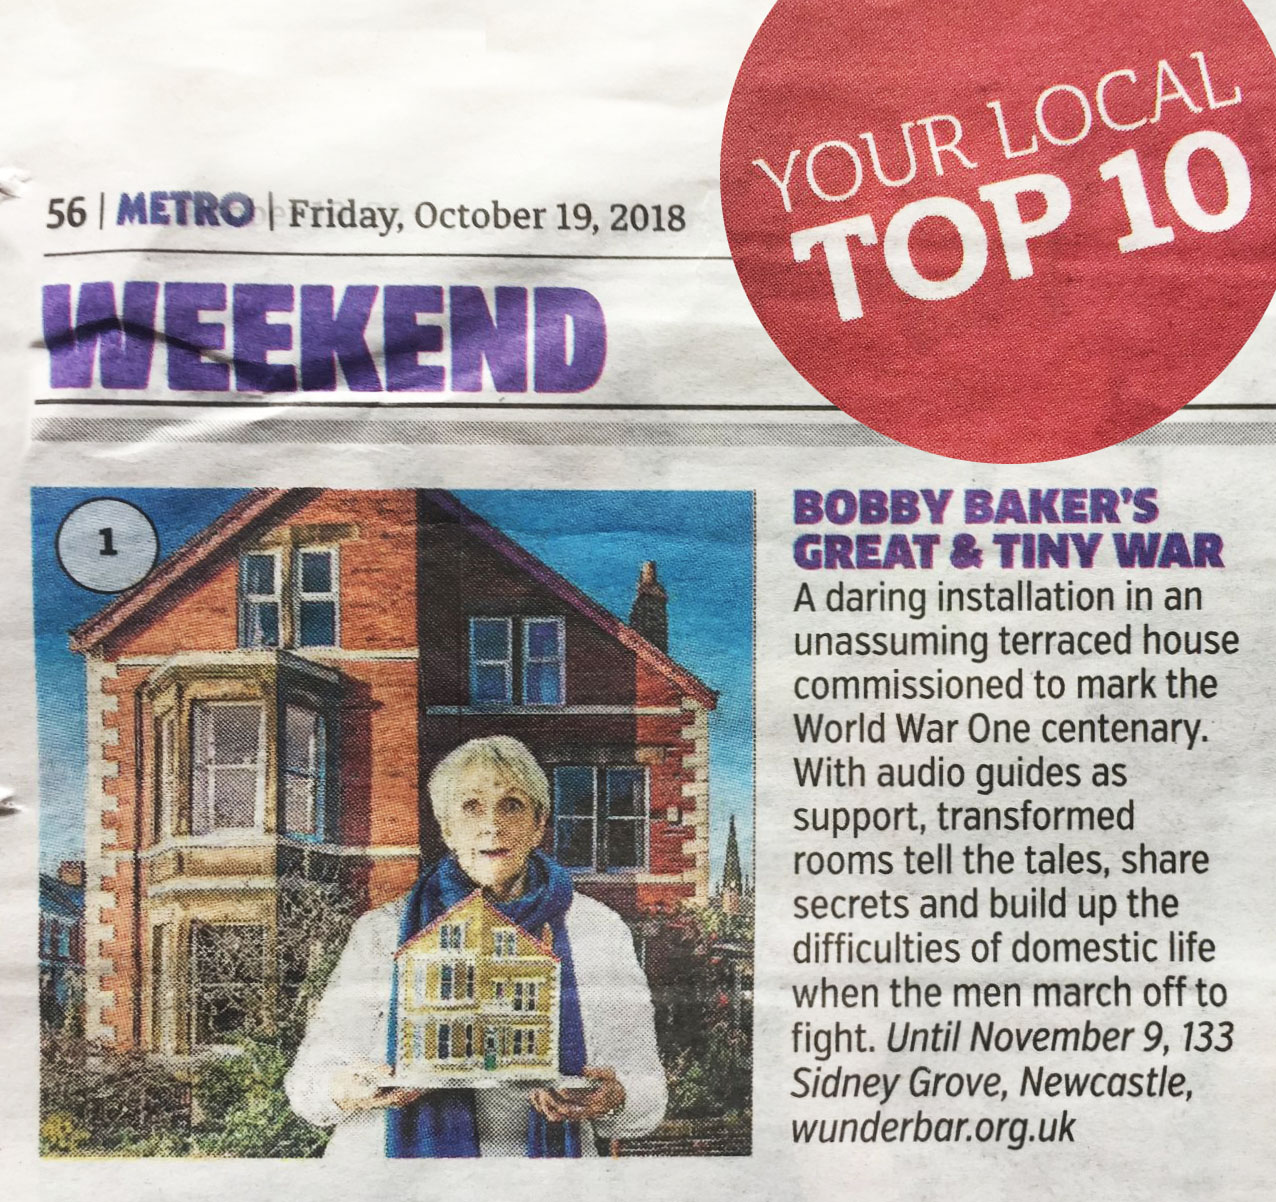 The Metro - Weekend No.1 - Your local top 10